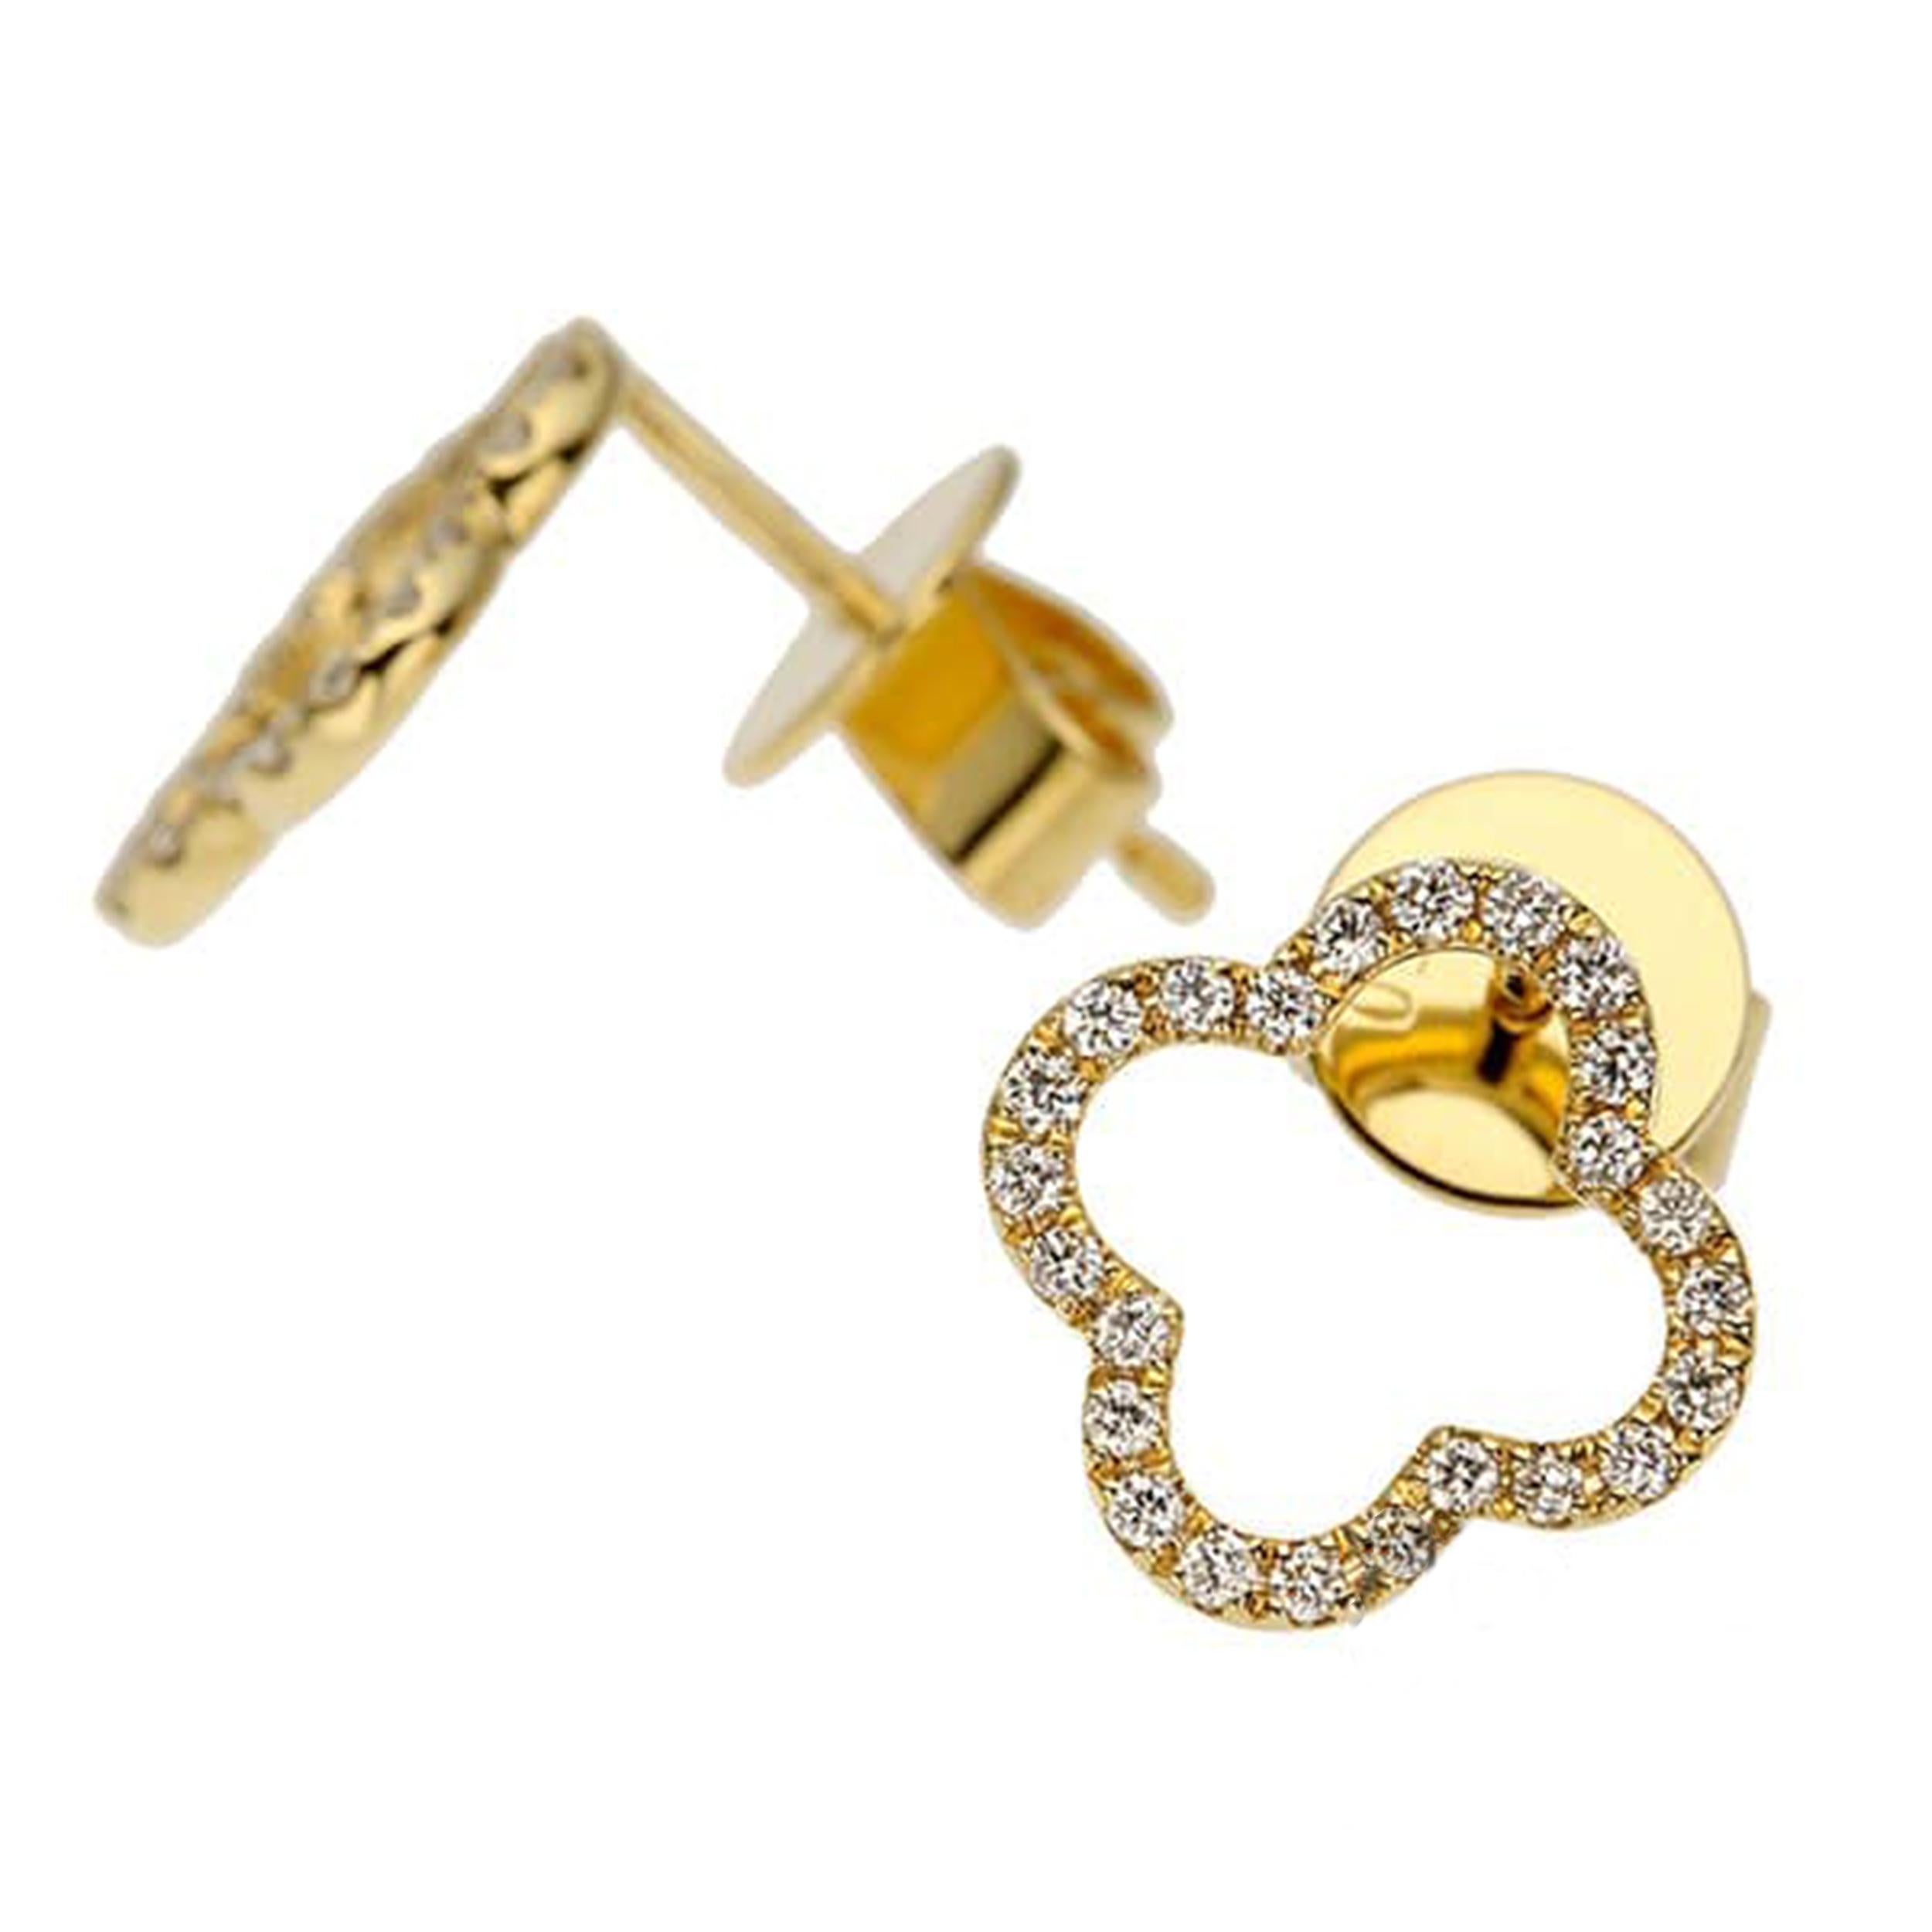 Artist 18K Yellow Gold Clover Shaped Diamond Earrings  0.11ct x 2  Approx. 10.5mm x 1 For Sale